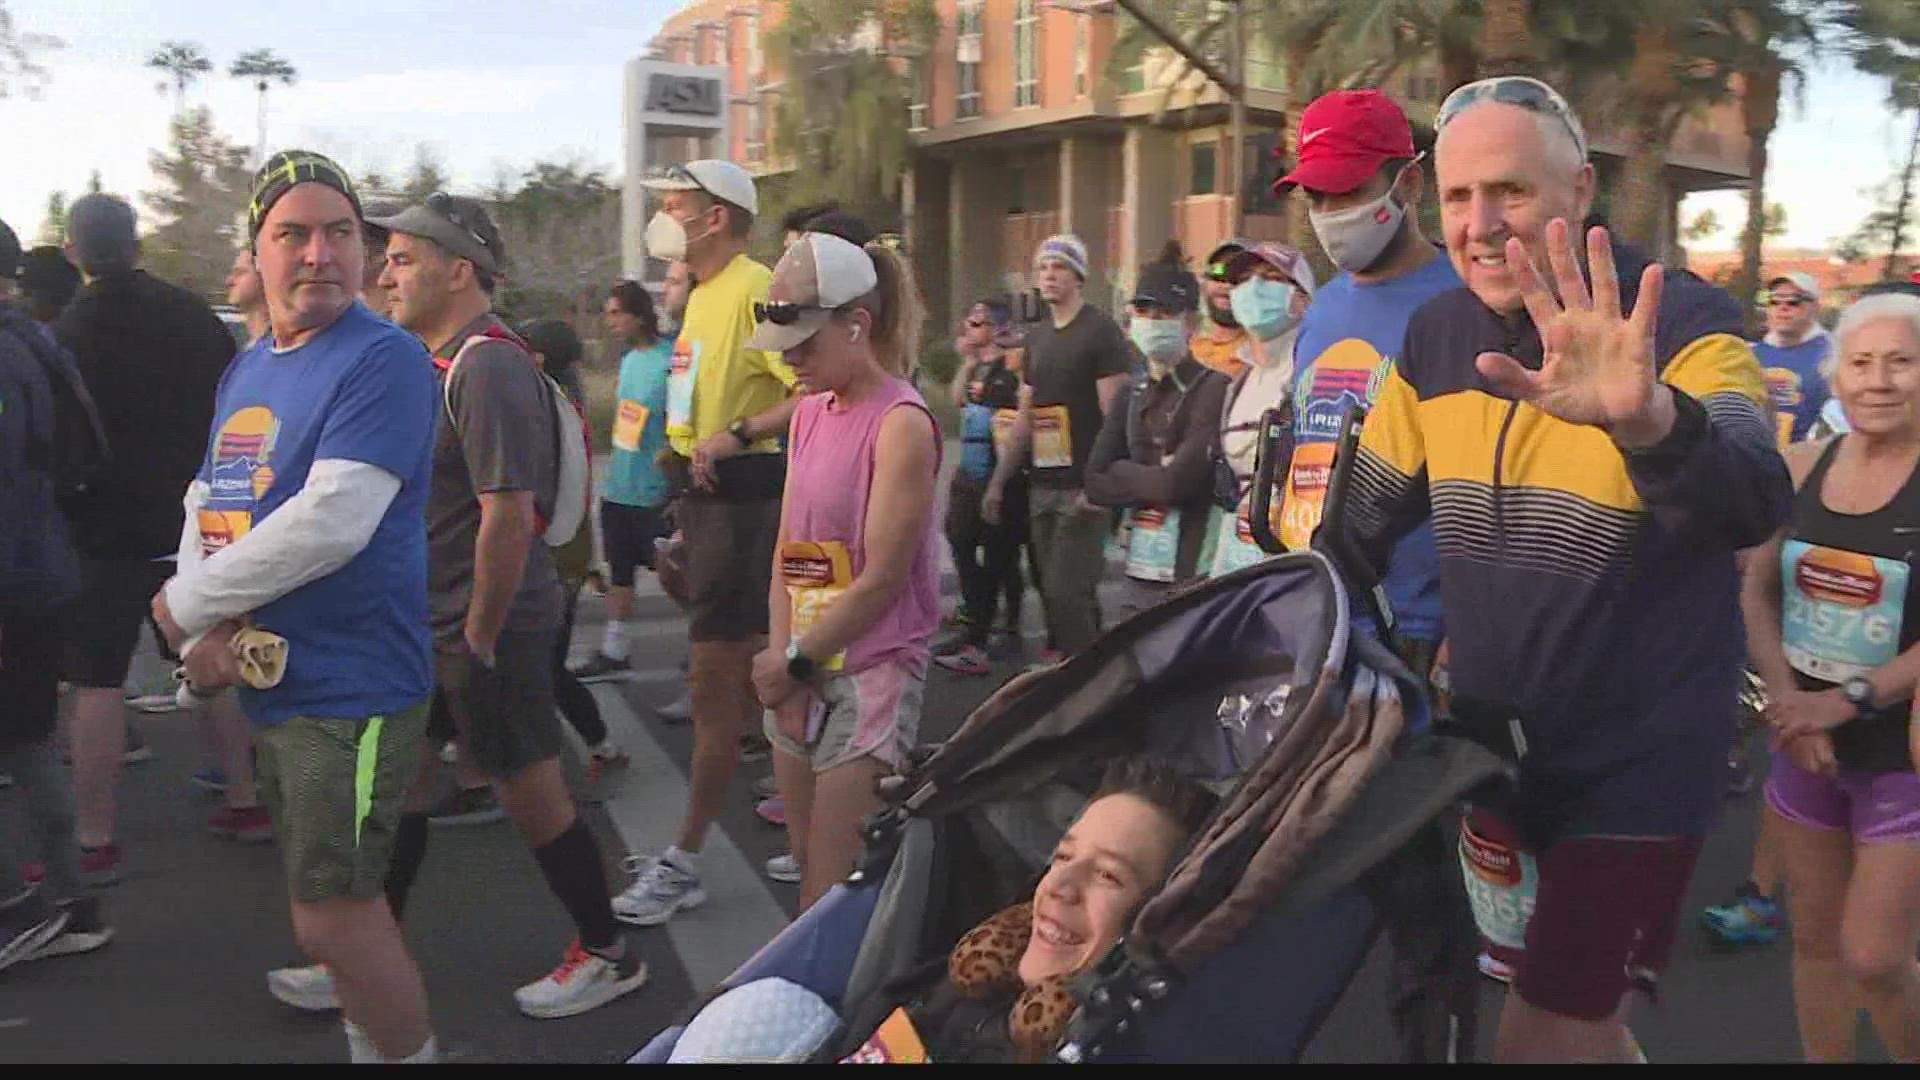 People from across the nation traveled to Phoenix to take part in the Rock ‘n’ Roll Arizona Marathon this weekend.